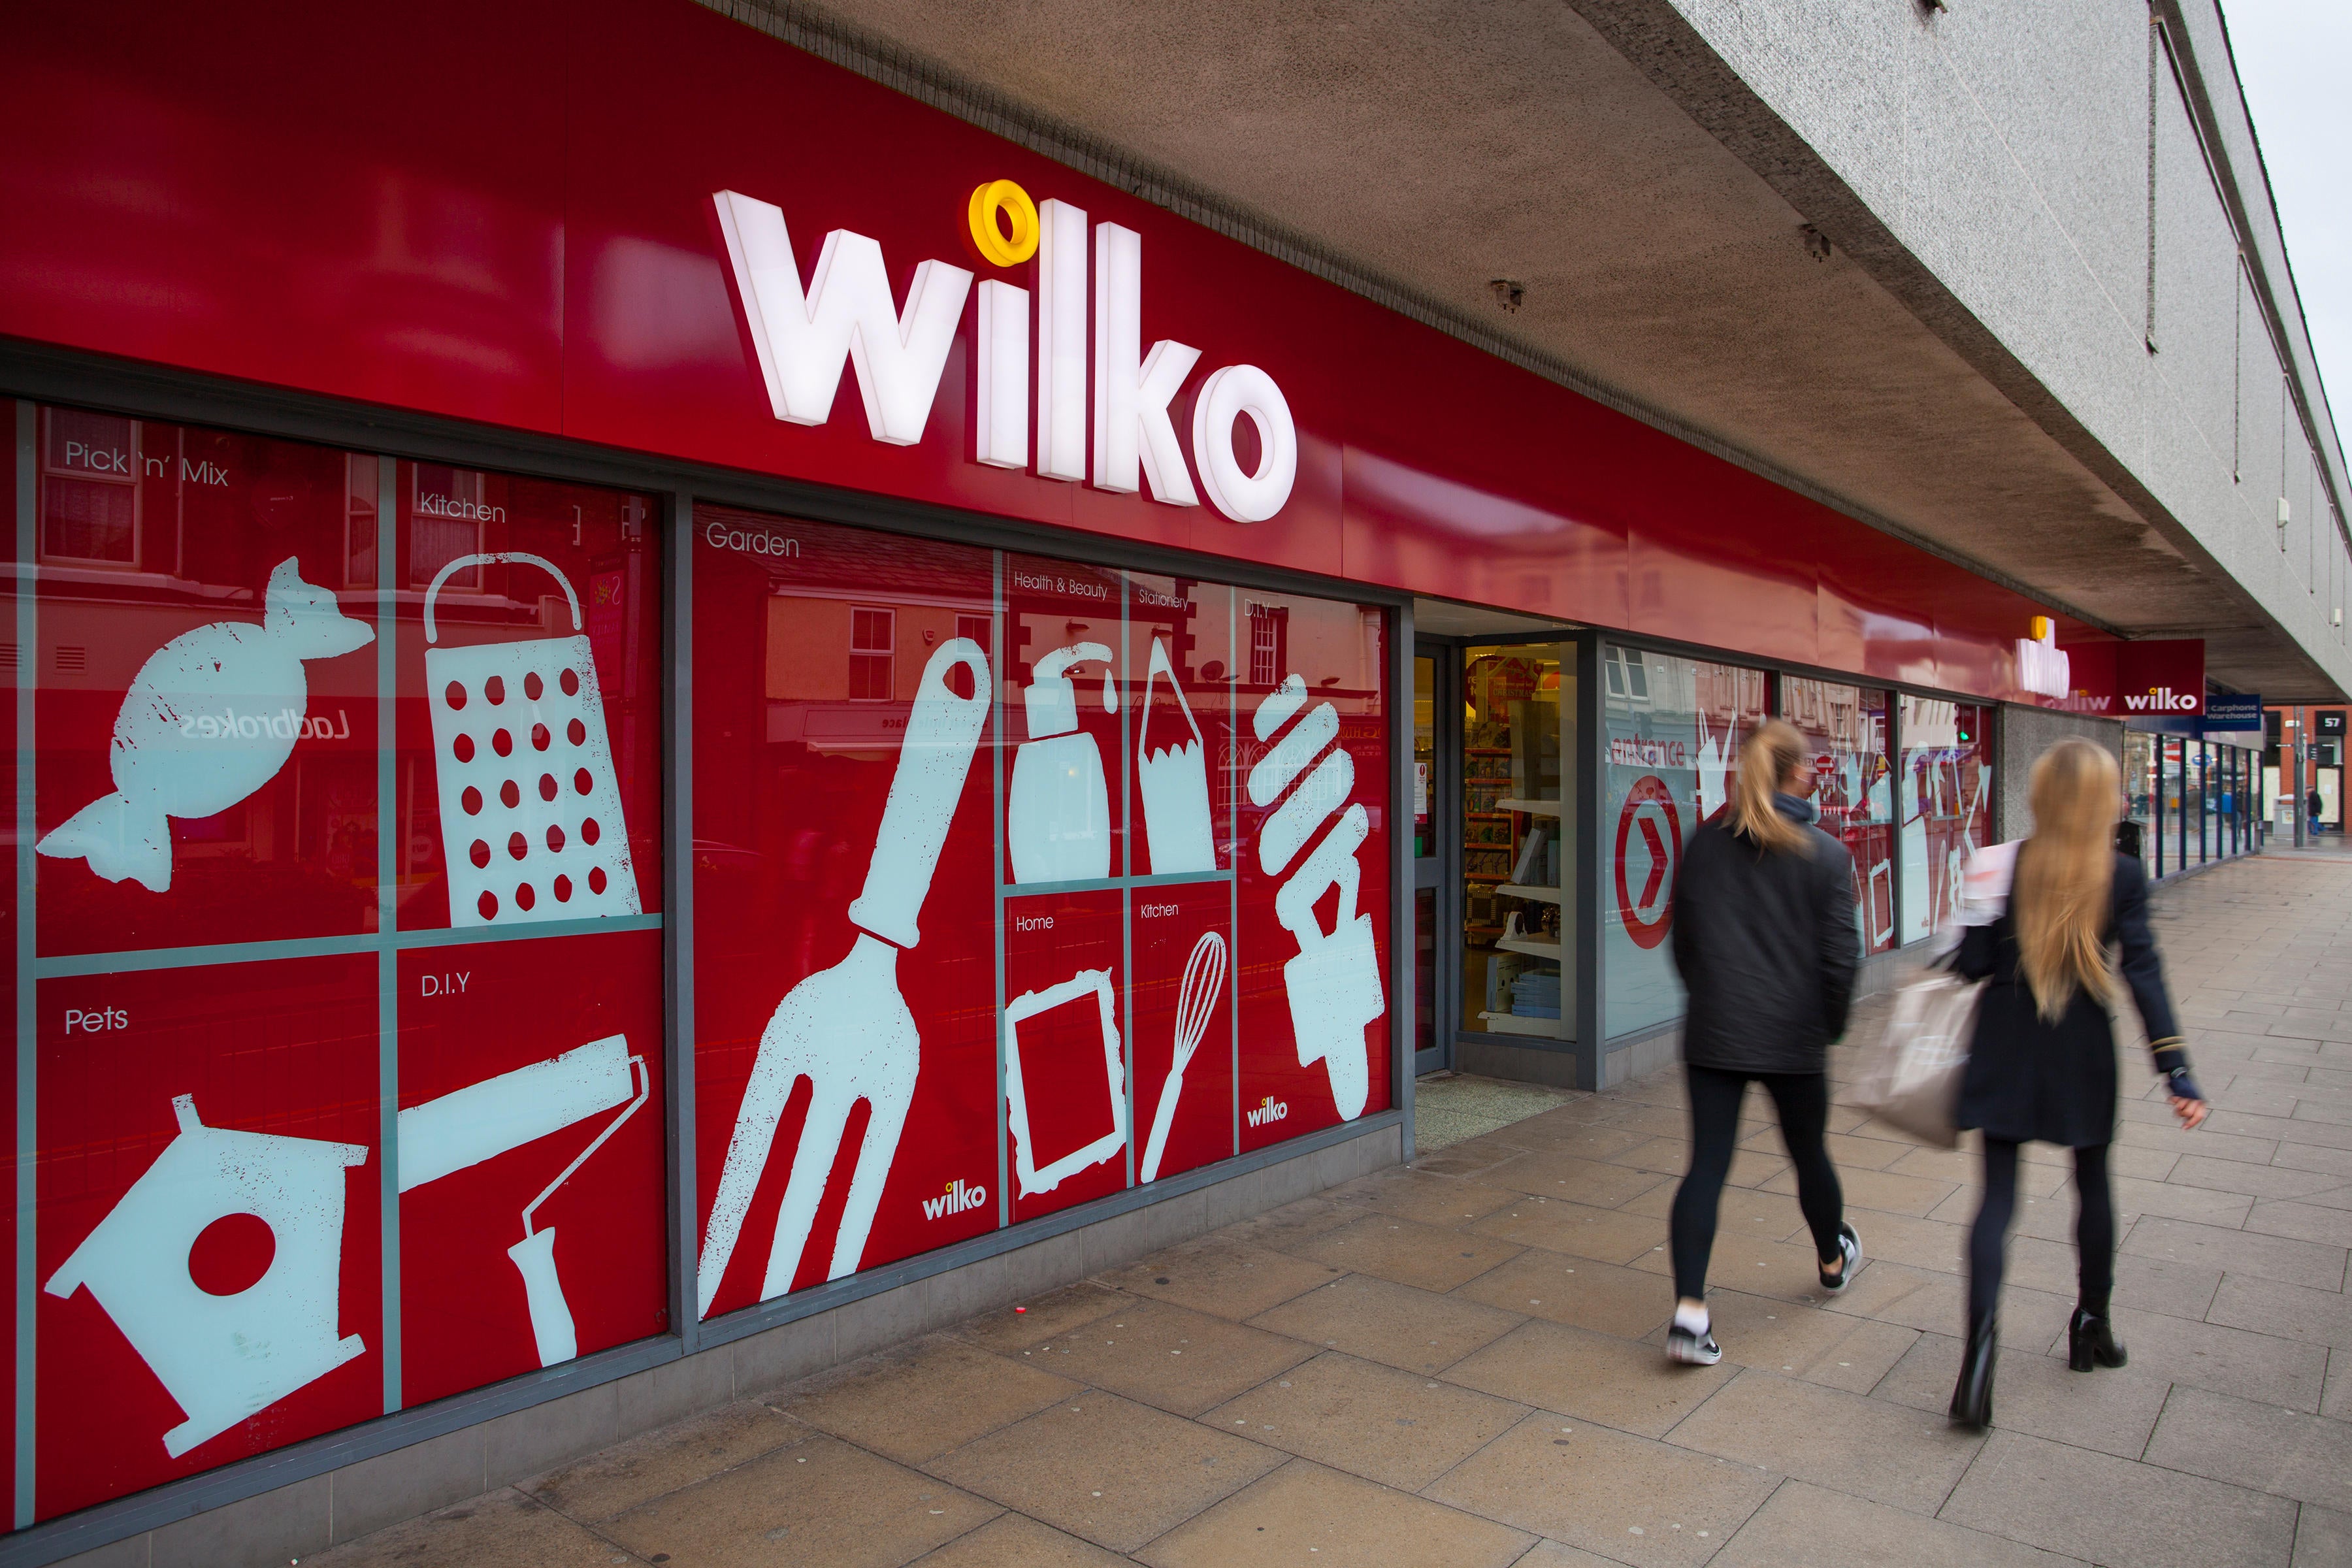 Wilko has apologised after telling staff to attend work even if they tested positive for Covid-19